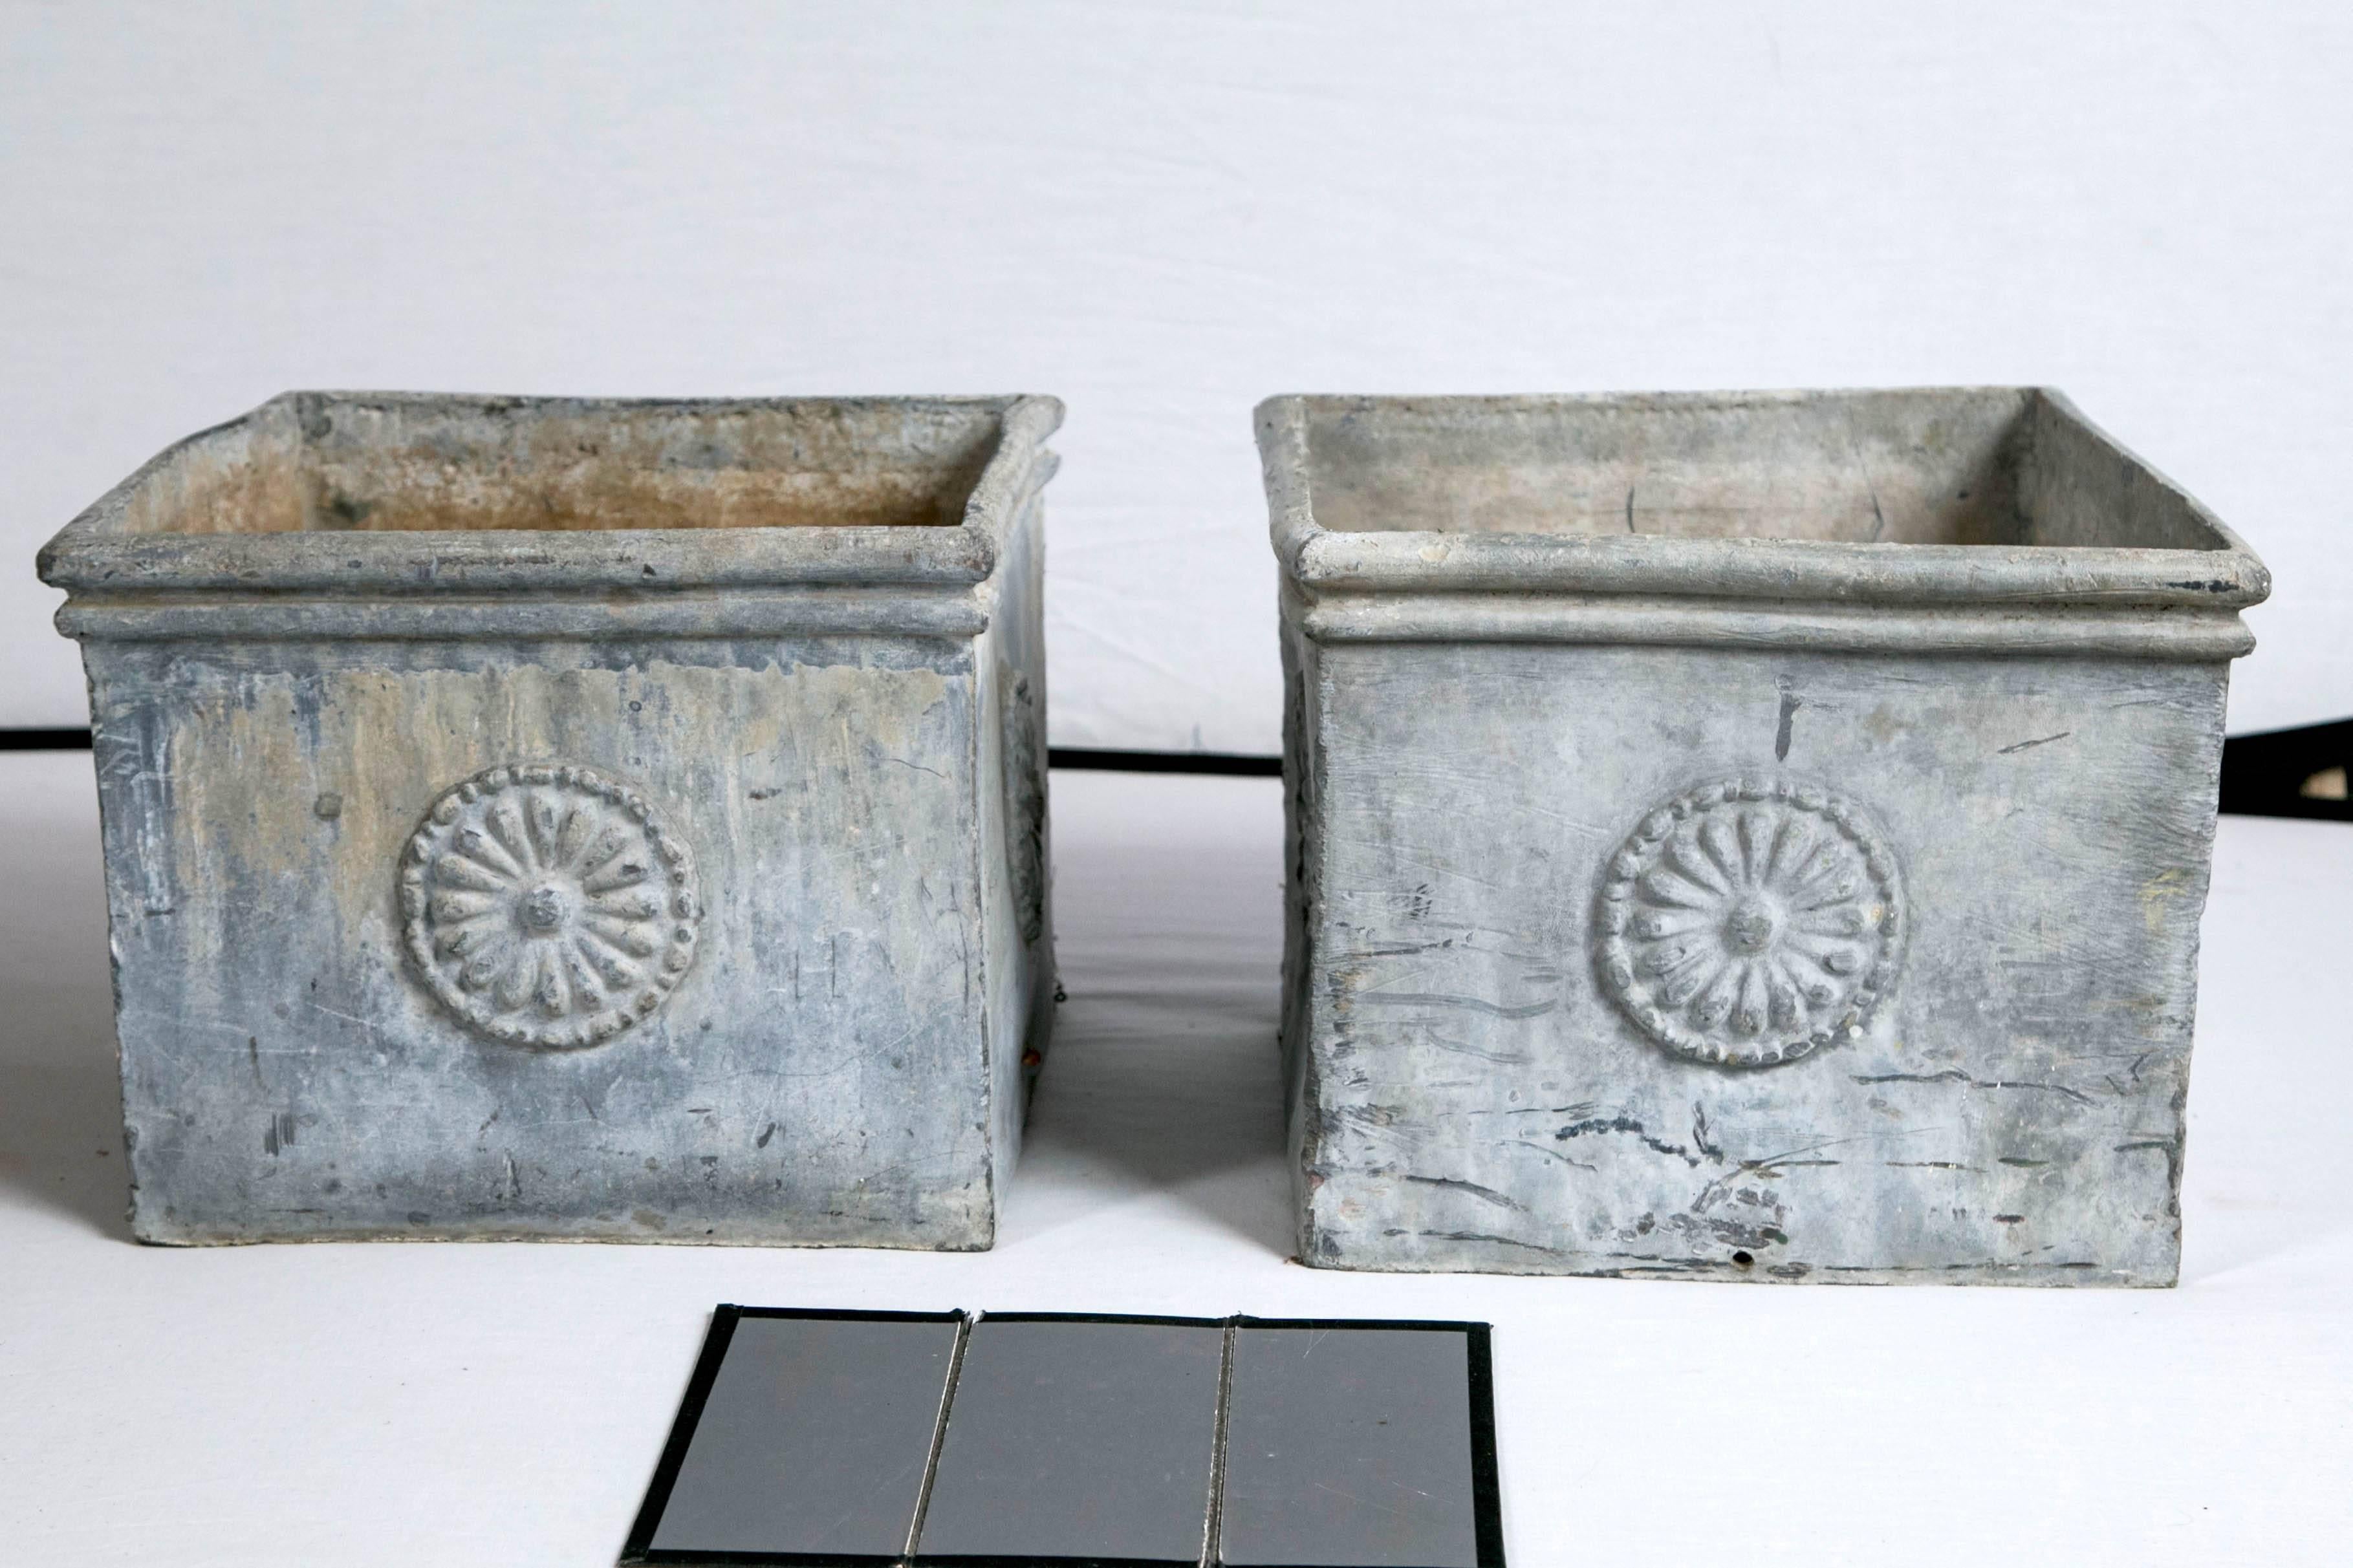 Pair of English lead planters, circa 1900. A wonderful matched pair of lead garden planters with highly detailed medallion decoration. Aged gray patina.